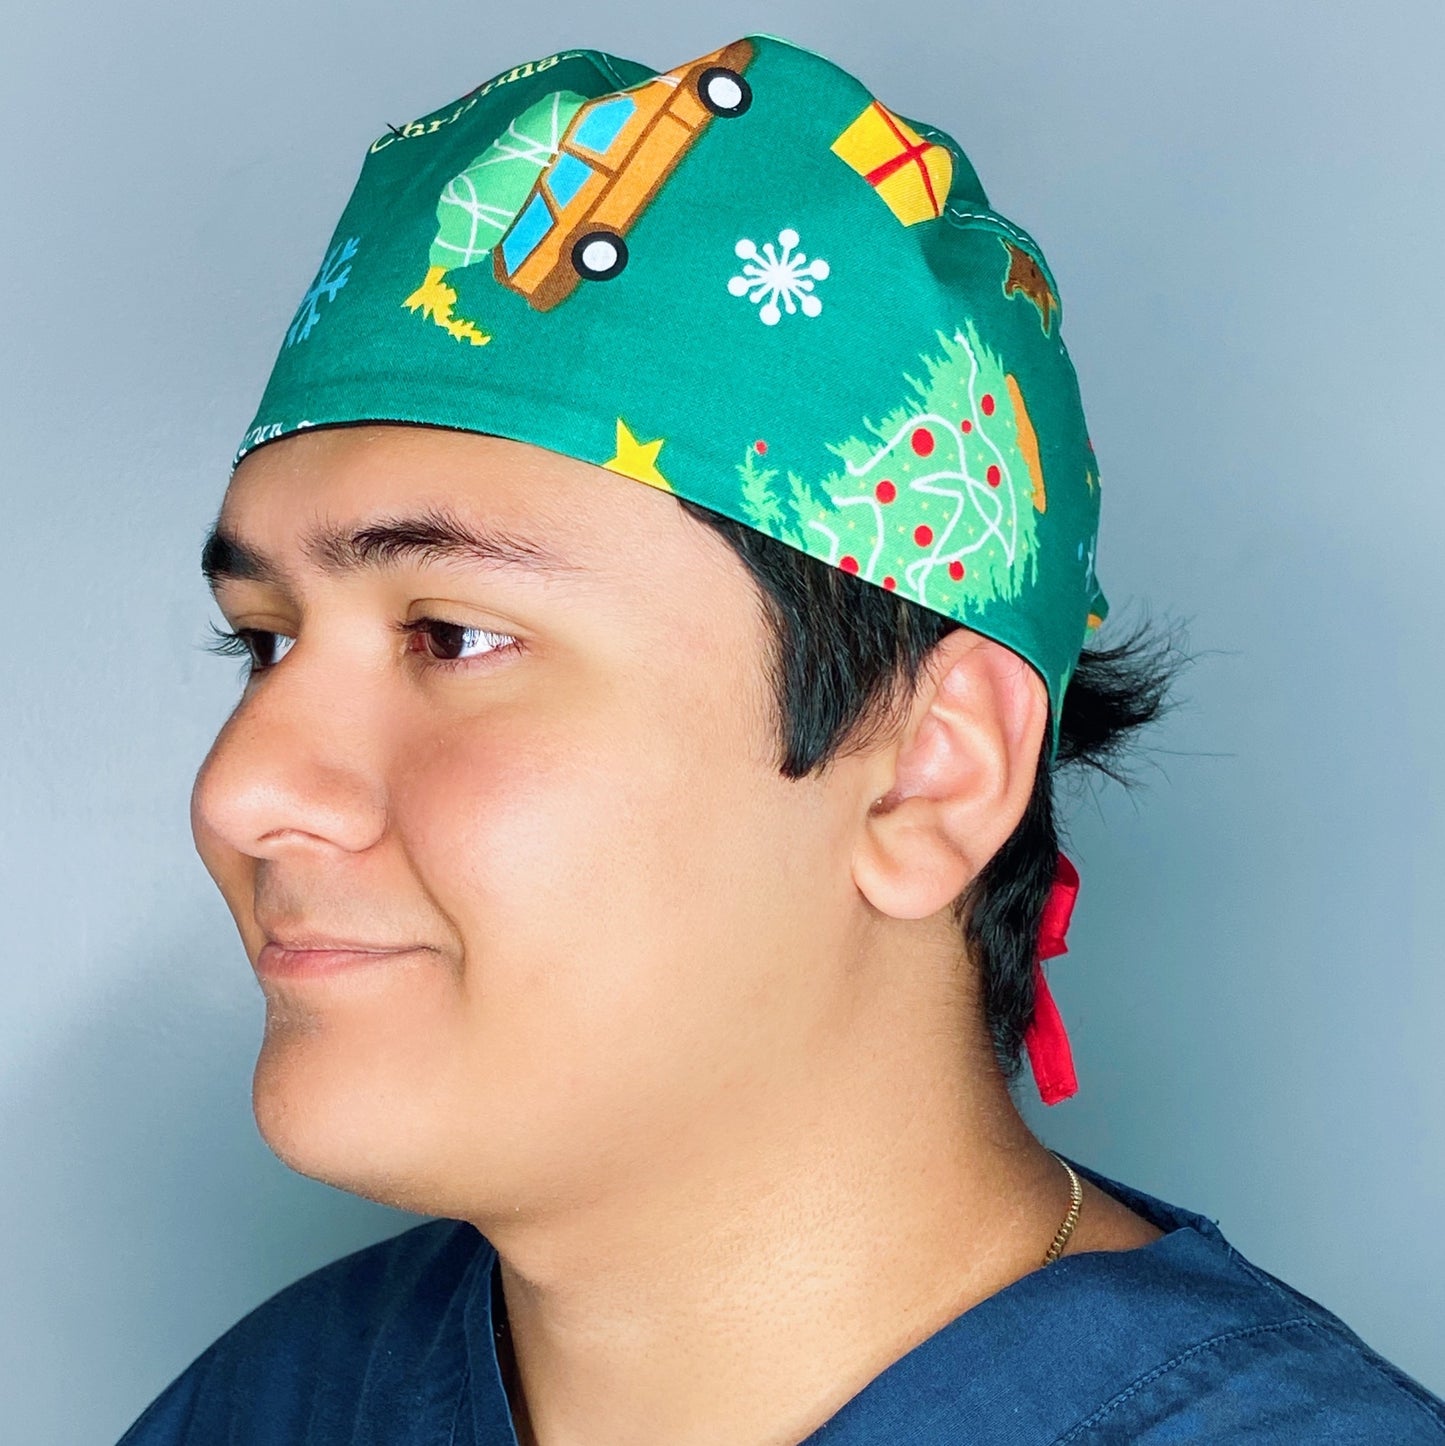 National Lampoon's Christmas Vacation Christmas/Winter themed Unisex Holiday Scrub Cap